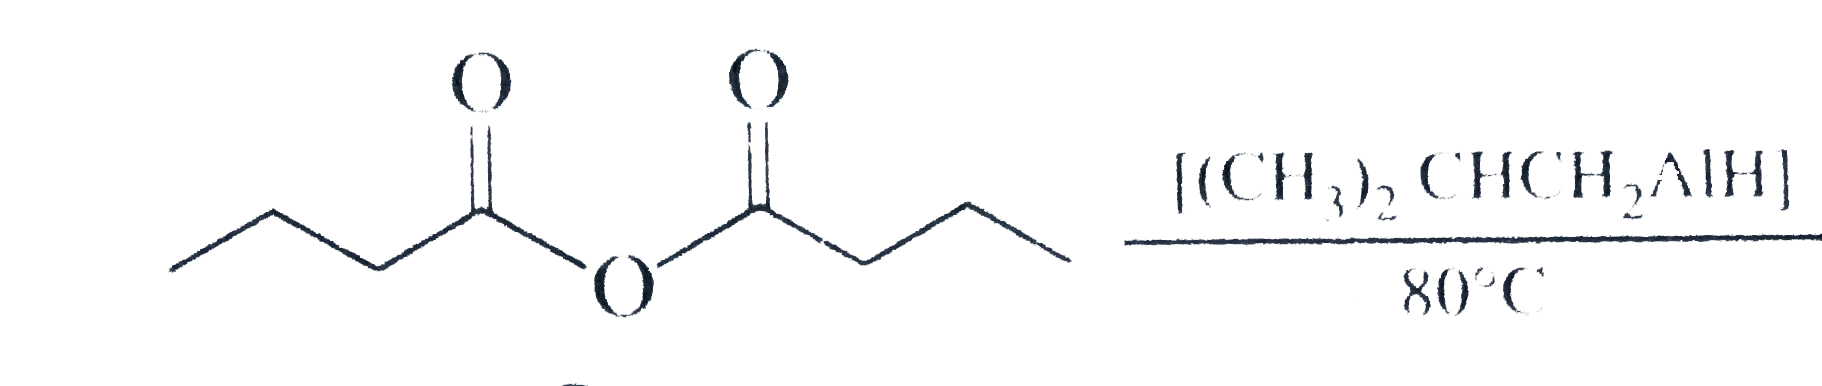 The major organic product formed in the reaction given below is